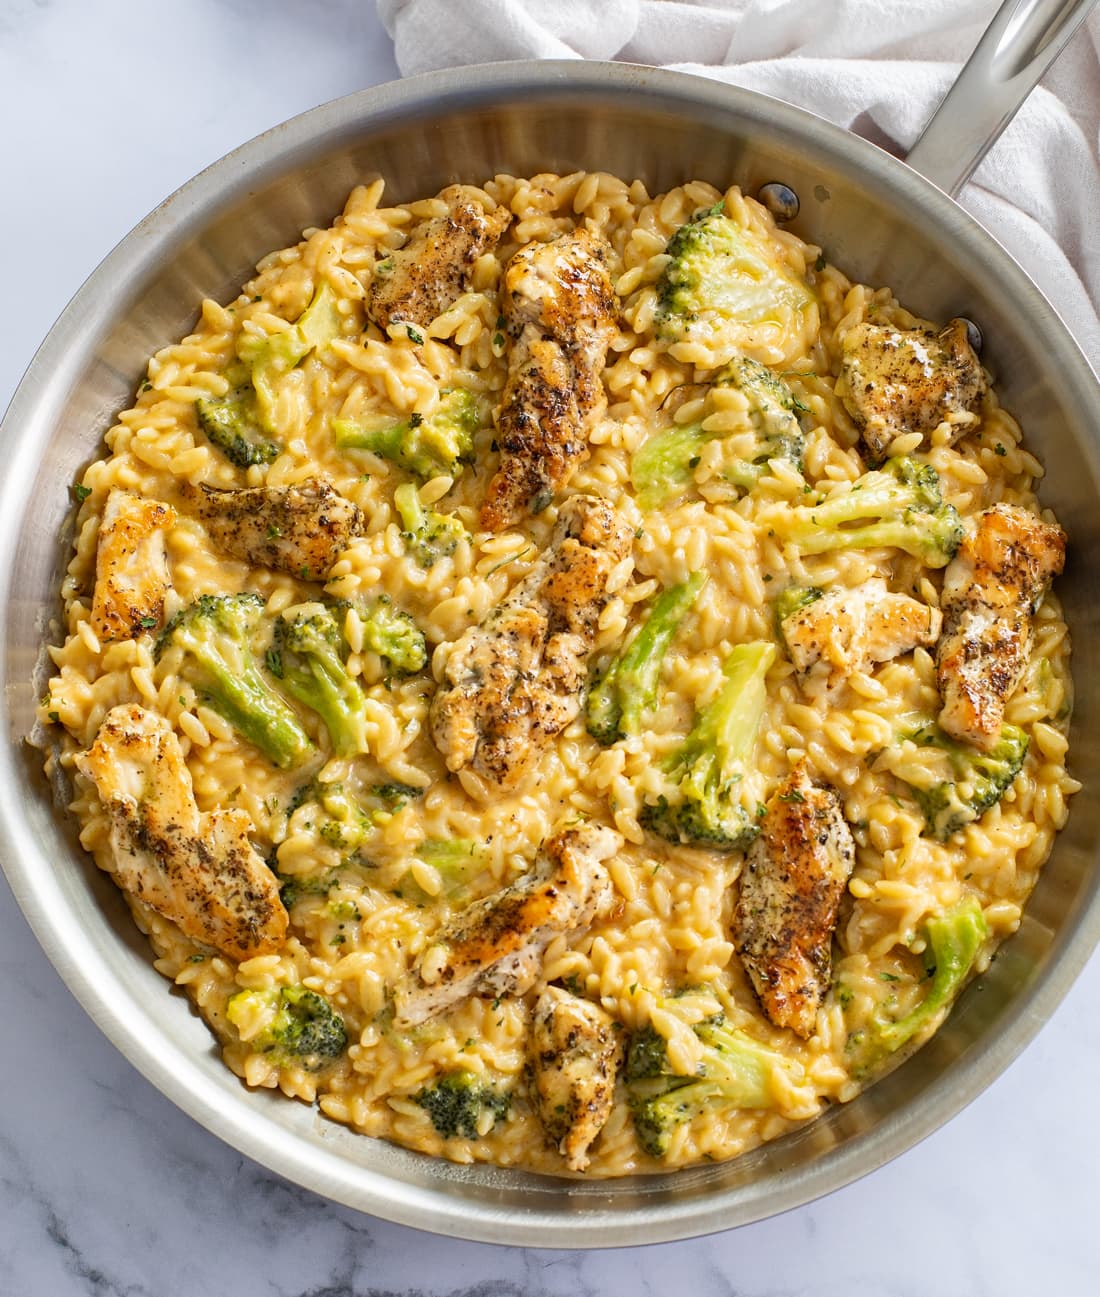 A skillet of Chicken and Orzo with Broccoli in a creamy cheese sauce.